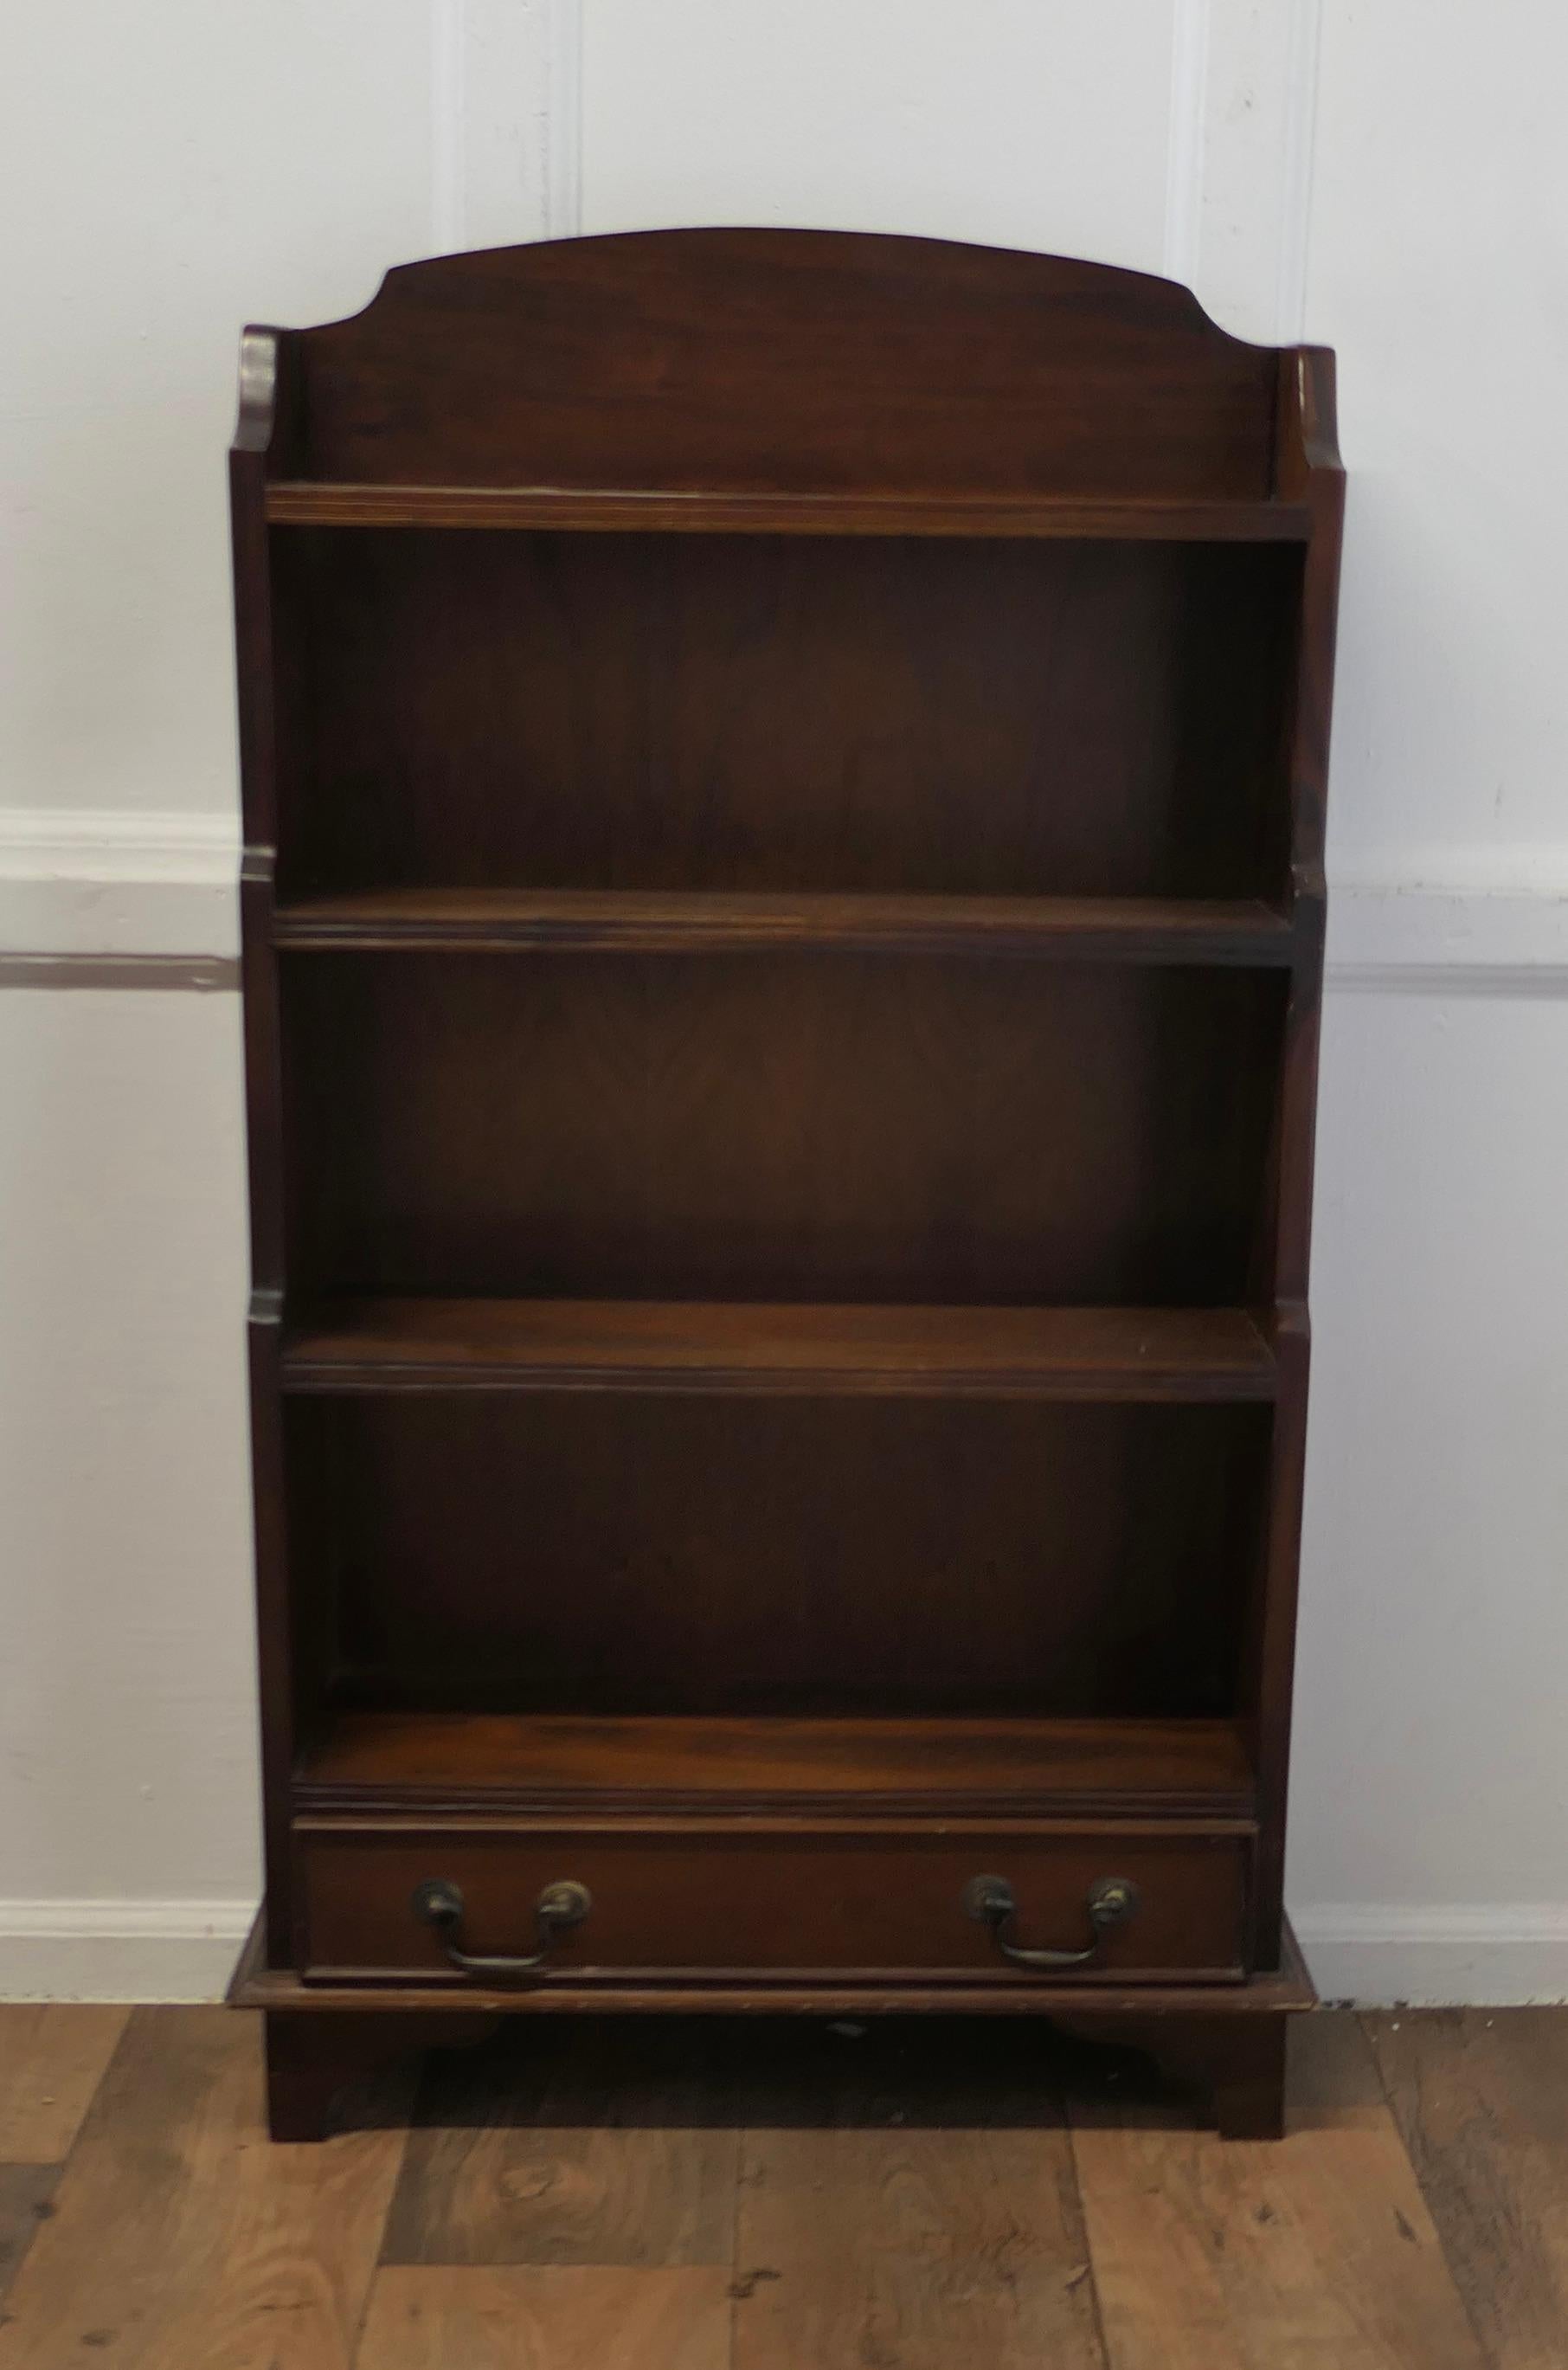 Art Deco Book Case with a Drawer at the Bottom

This charming little shelf unit has a gallery to the back and a waterfall shape to the sides, it has 4 open shelves, and at the bottom there is a long drawer
The shelf is in good condition and is an